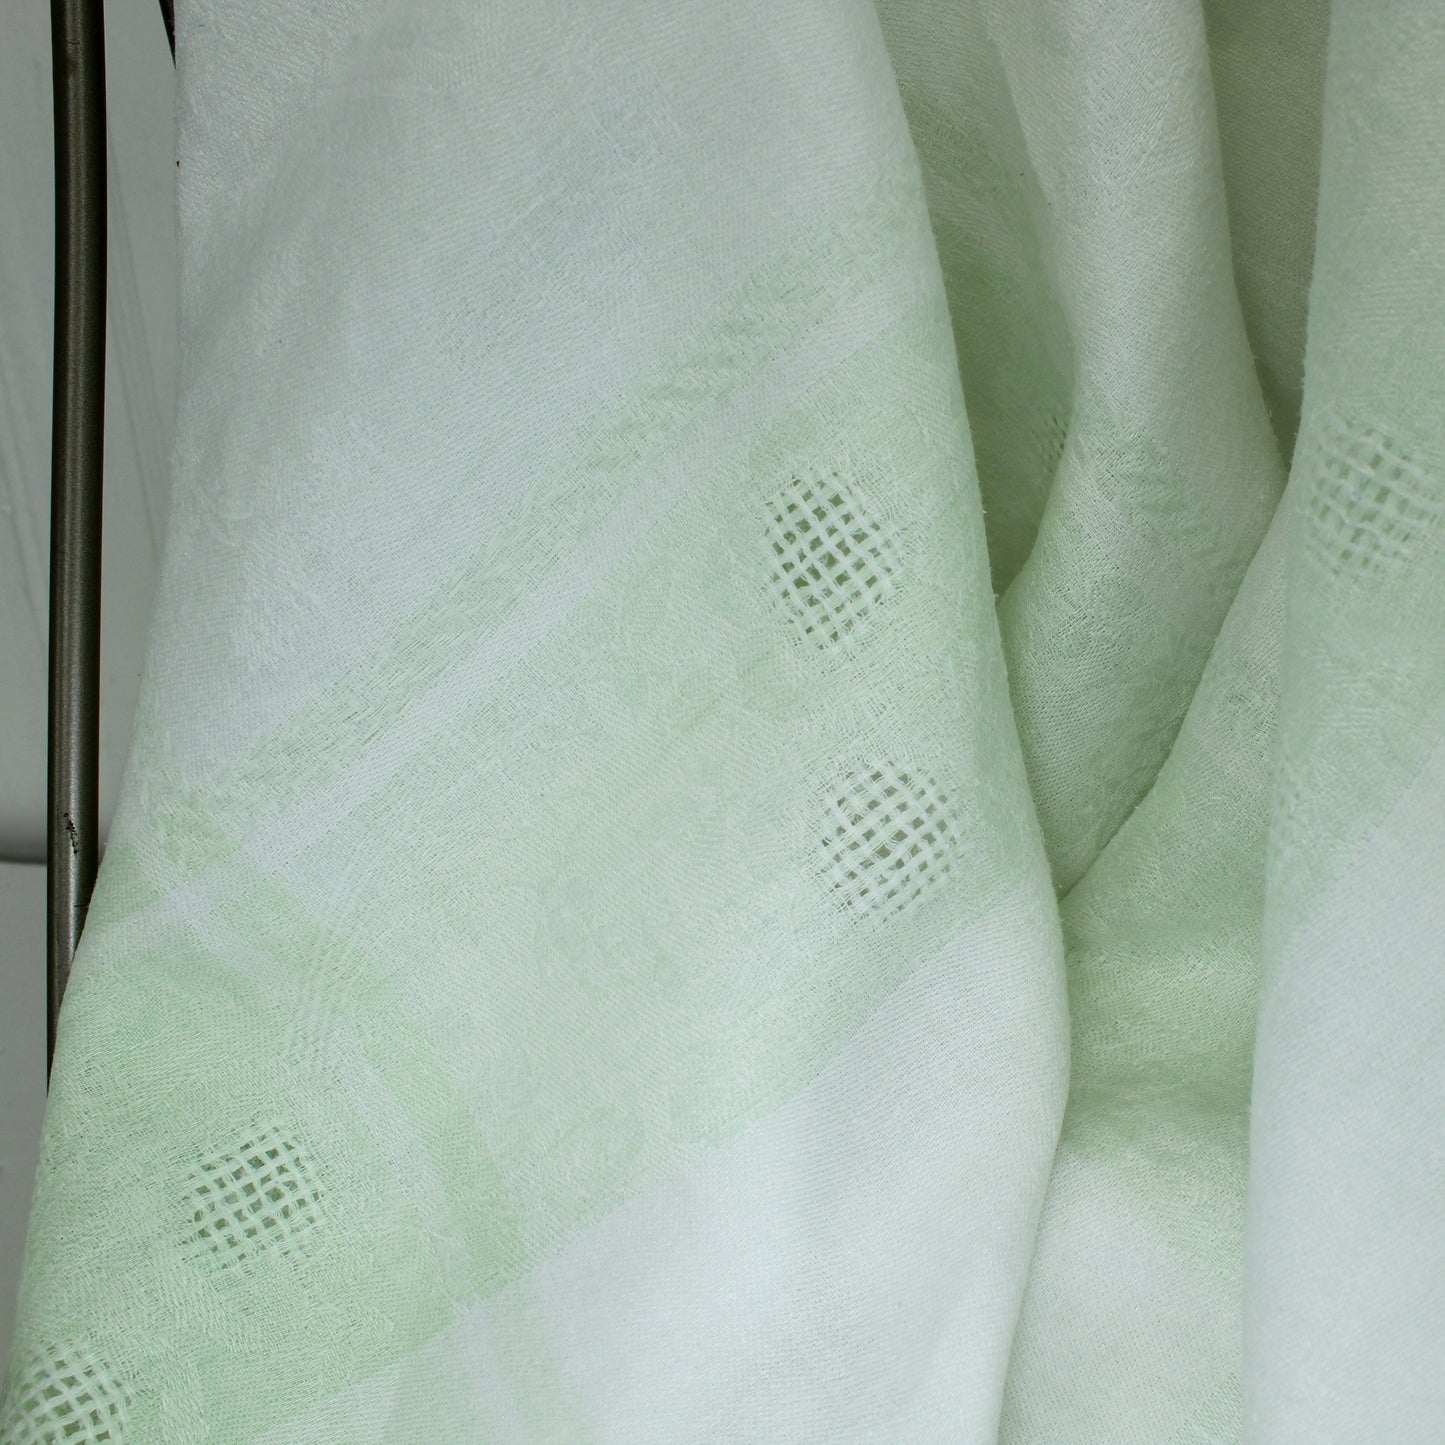 Lovely Older Small White Table Cloth Pale Green Borders Linen Openwork closeup of lovely detail